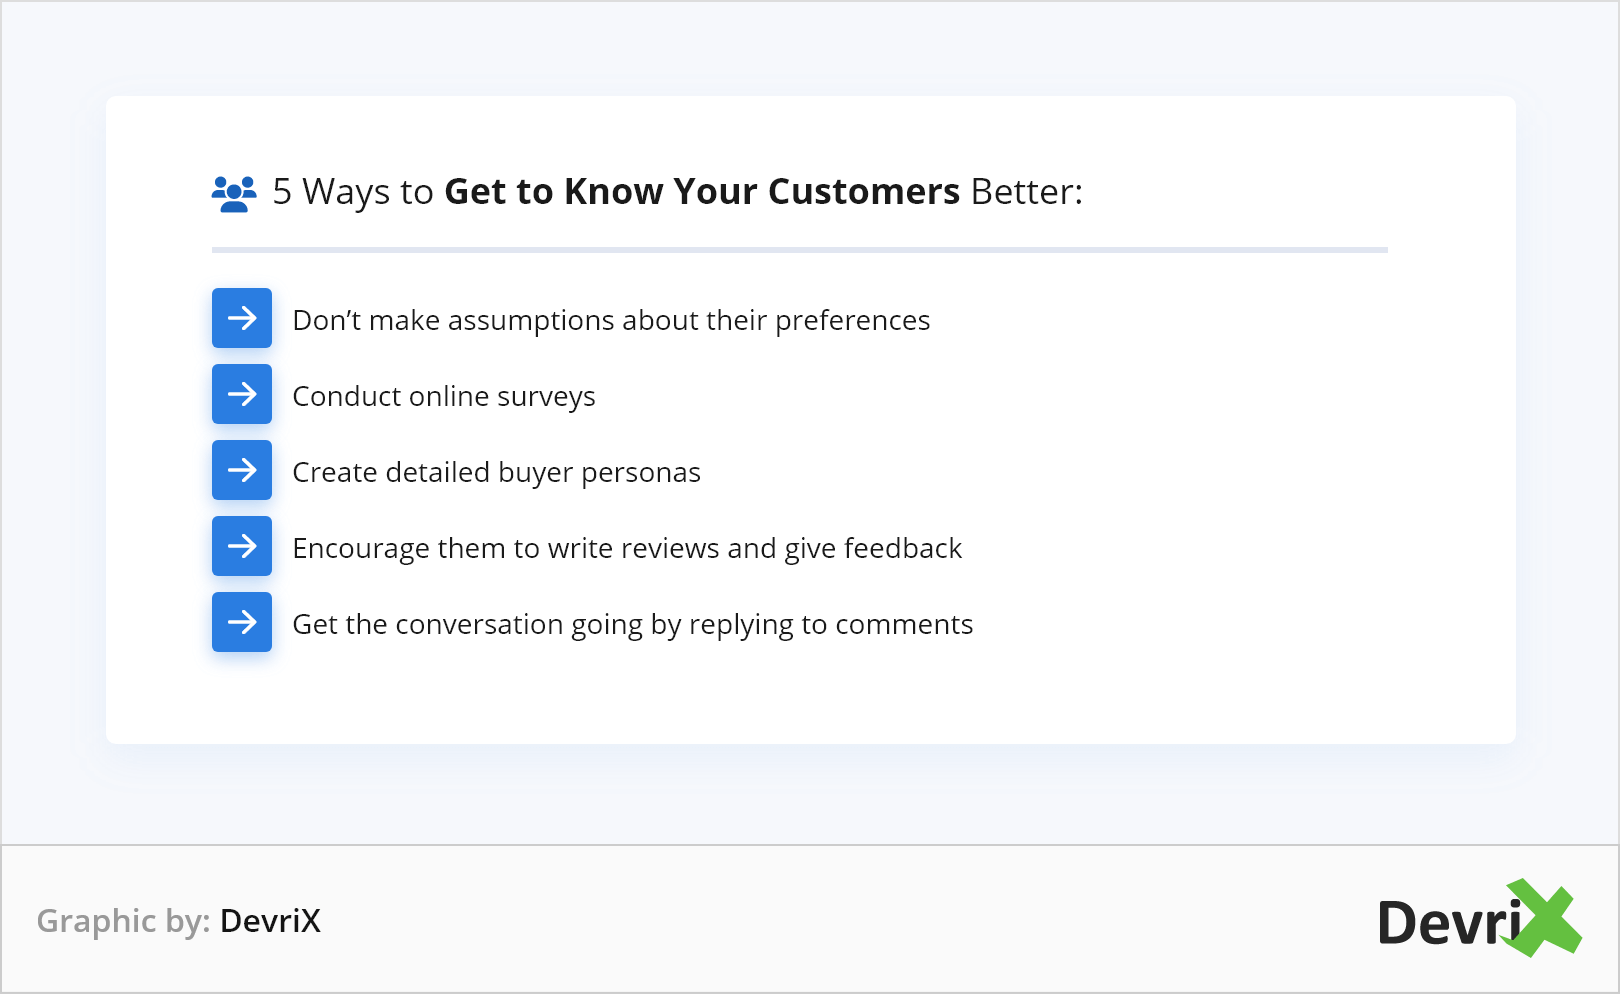 5 Ways to Get to Know Your Customers Better